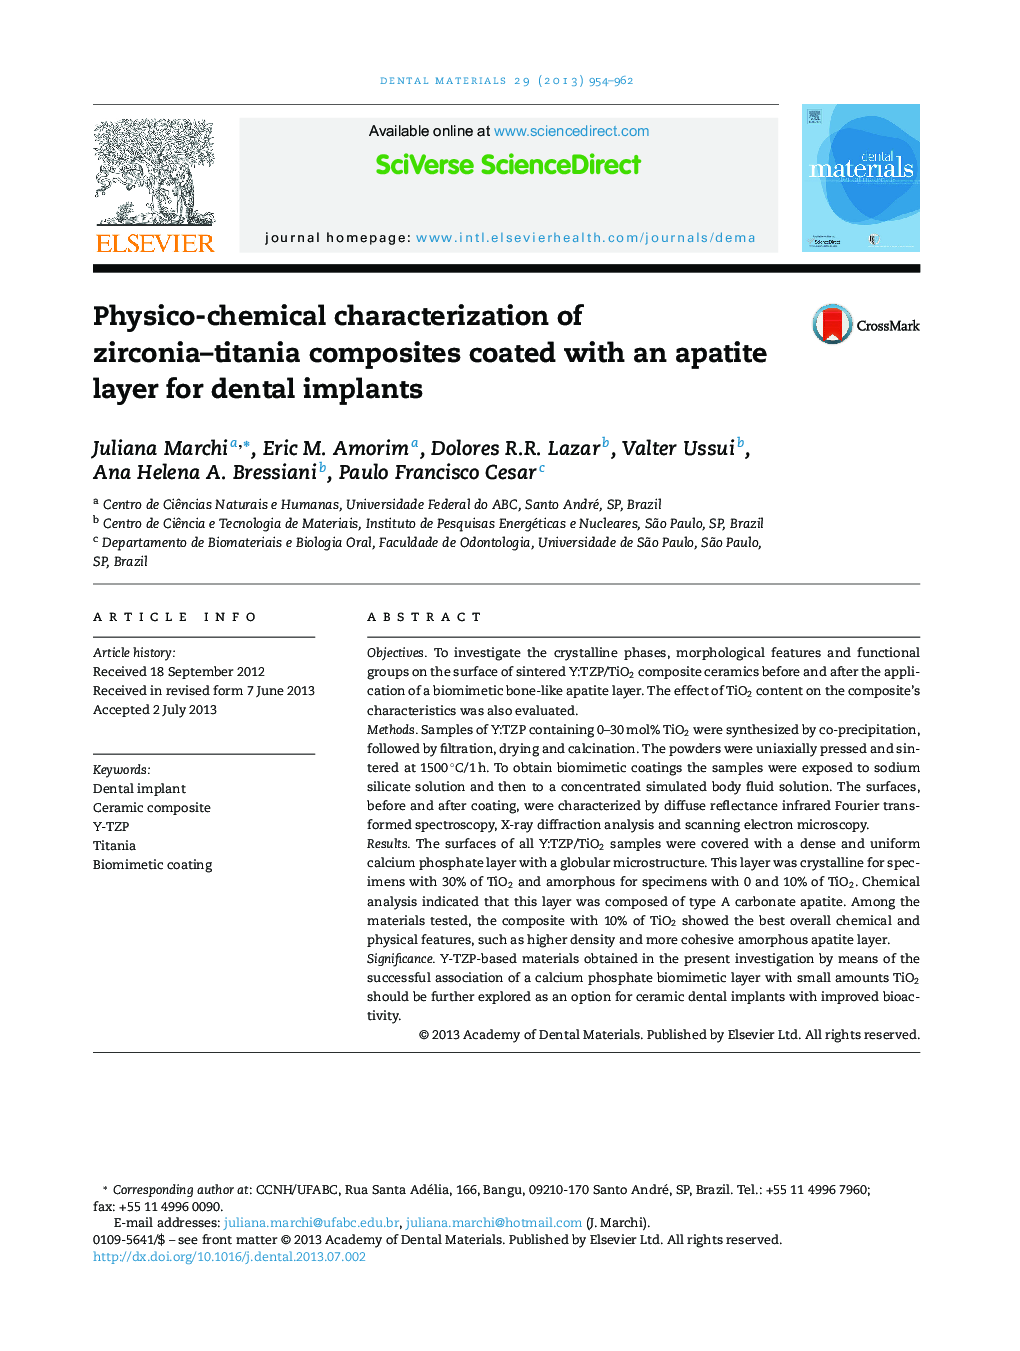 Physico-chemical characterization of zirconia–titania composites coated with an apatite layer for dental implants